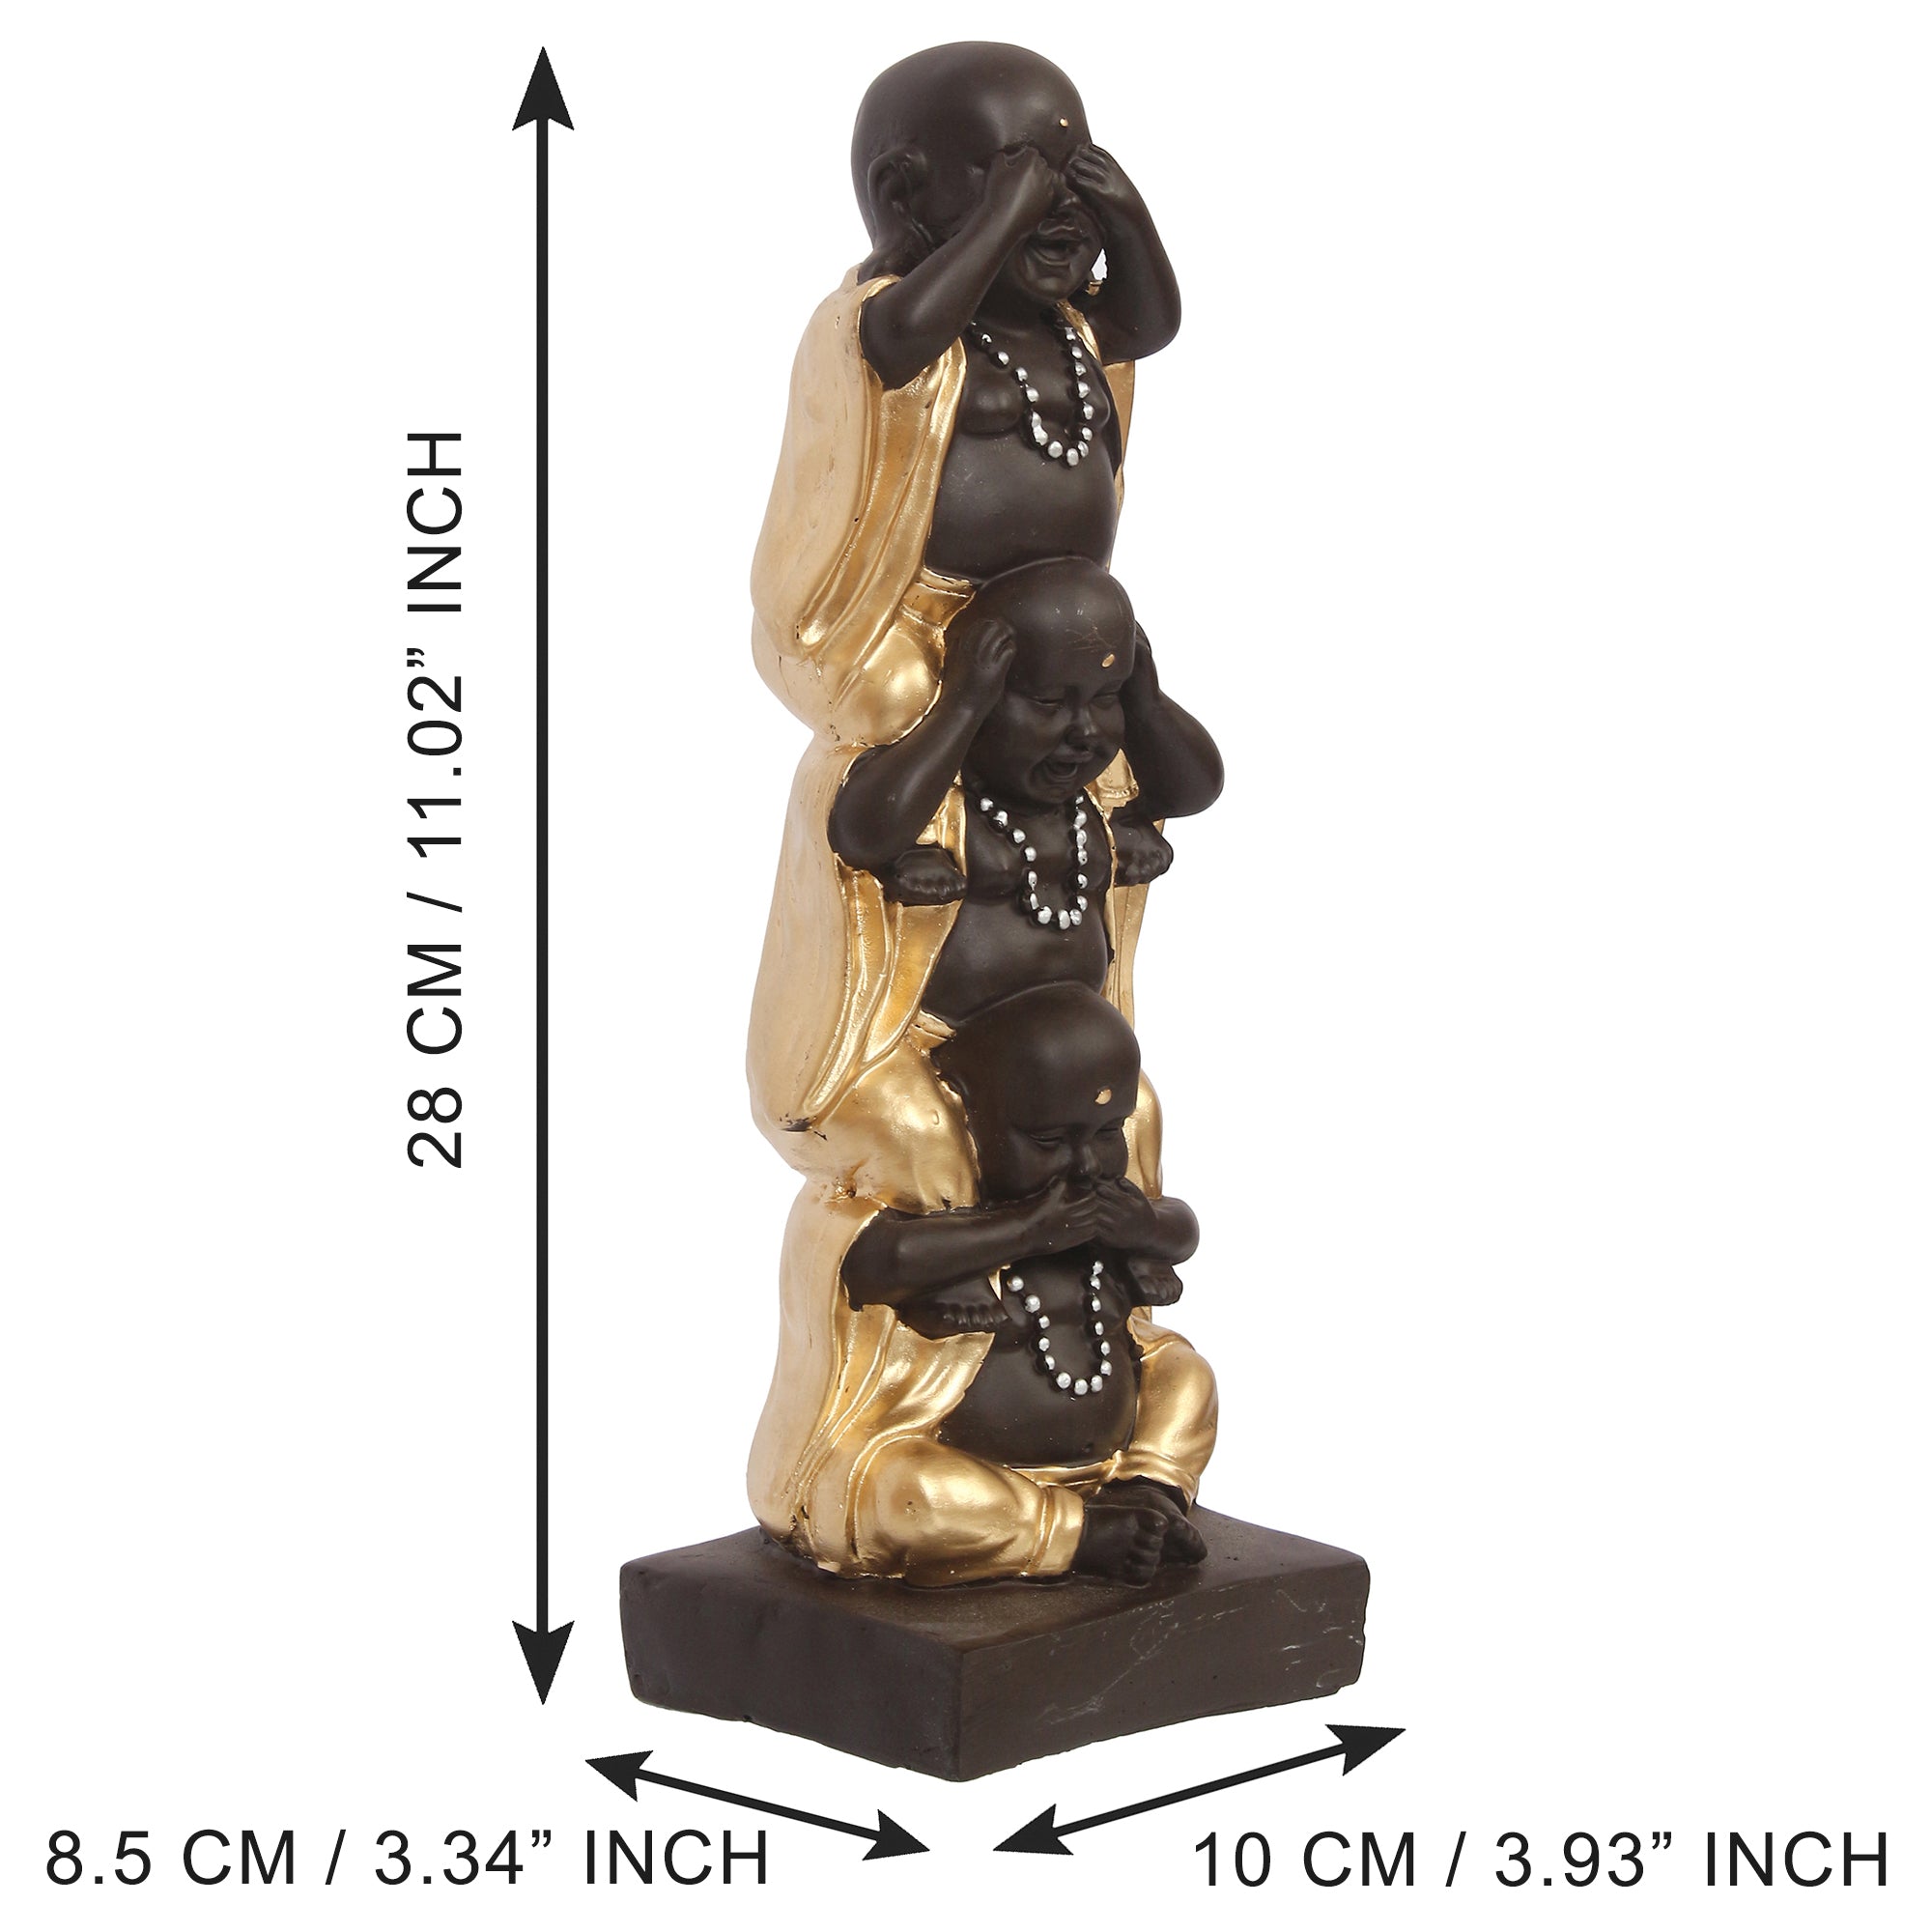 Polyresin Black and Golden Set of 3 Laughing Buddha Statue Standing on each other Decorative Showpiece 2